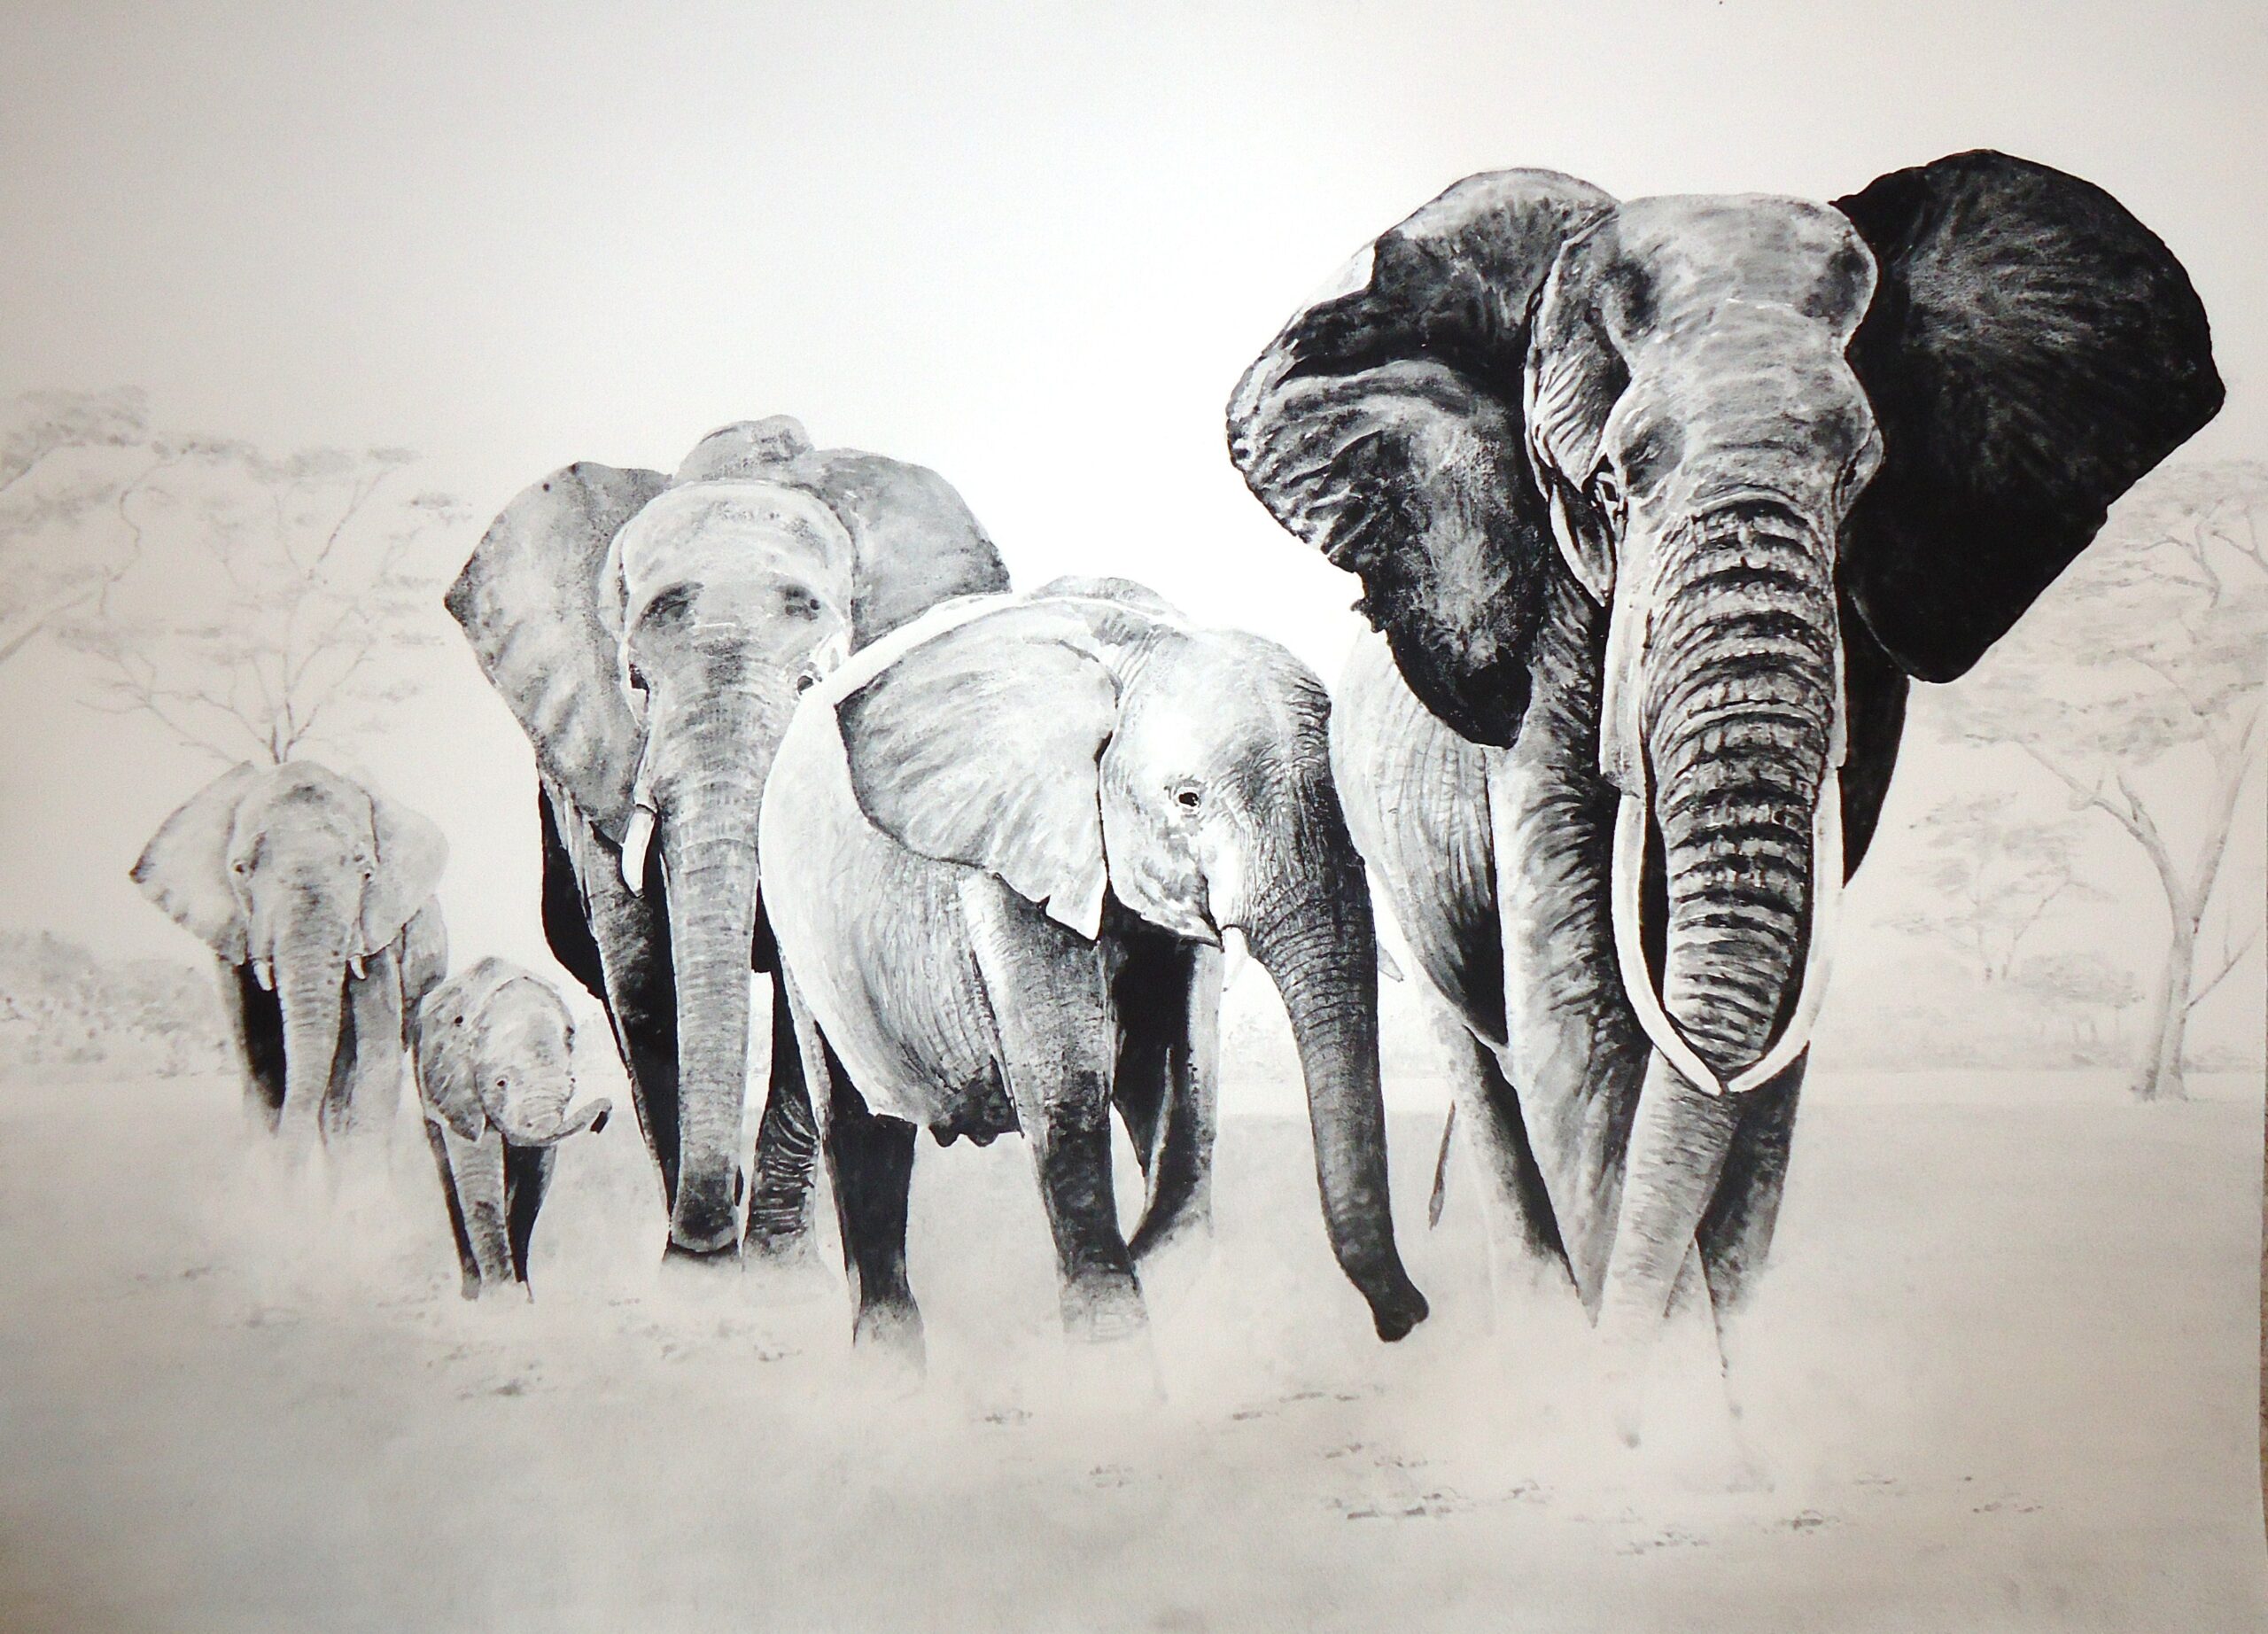 A painting of a family of elephants by Keith Cains.